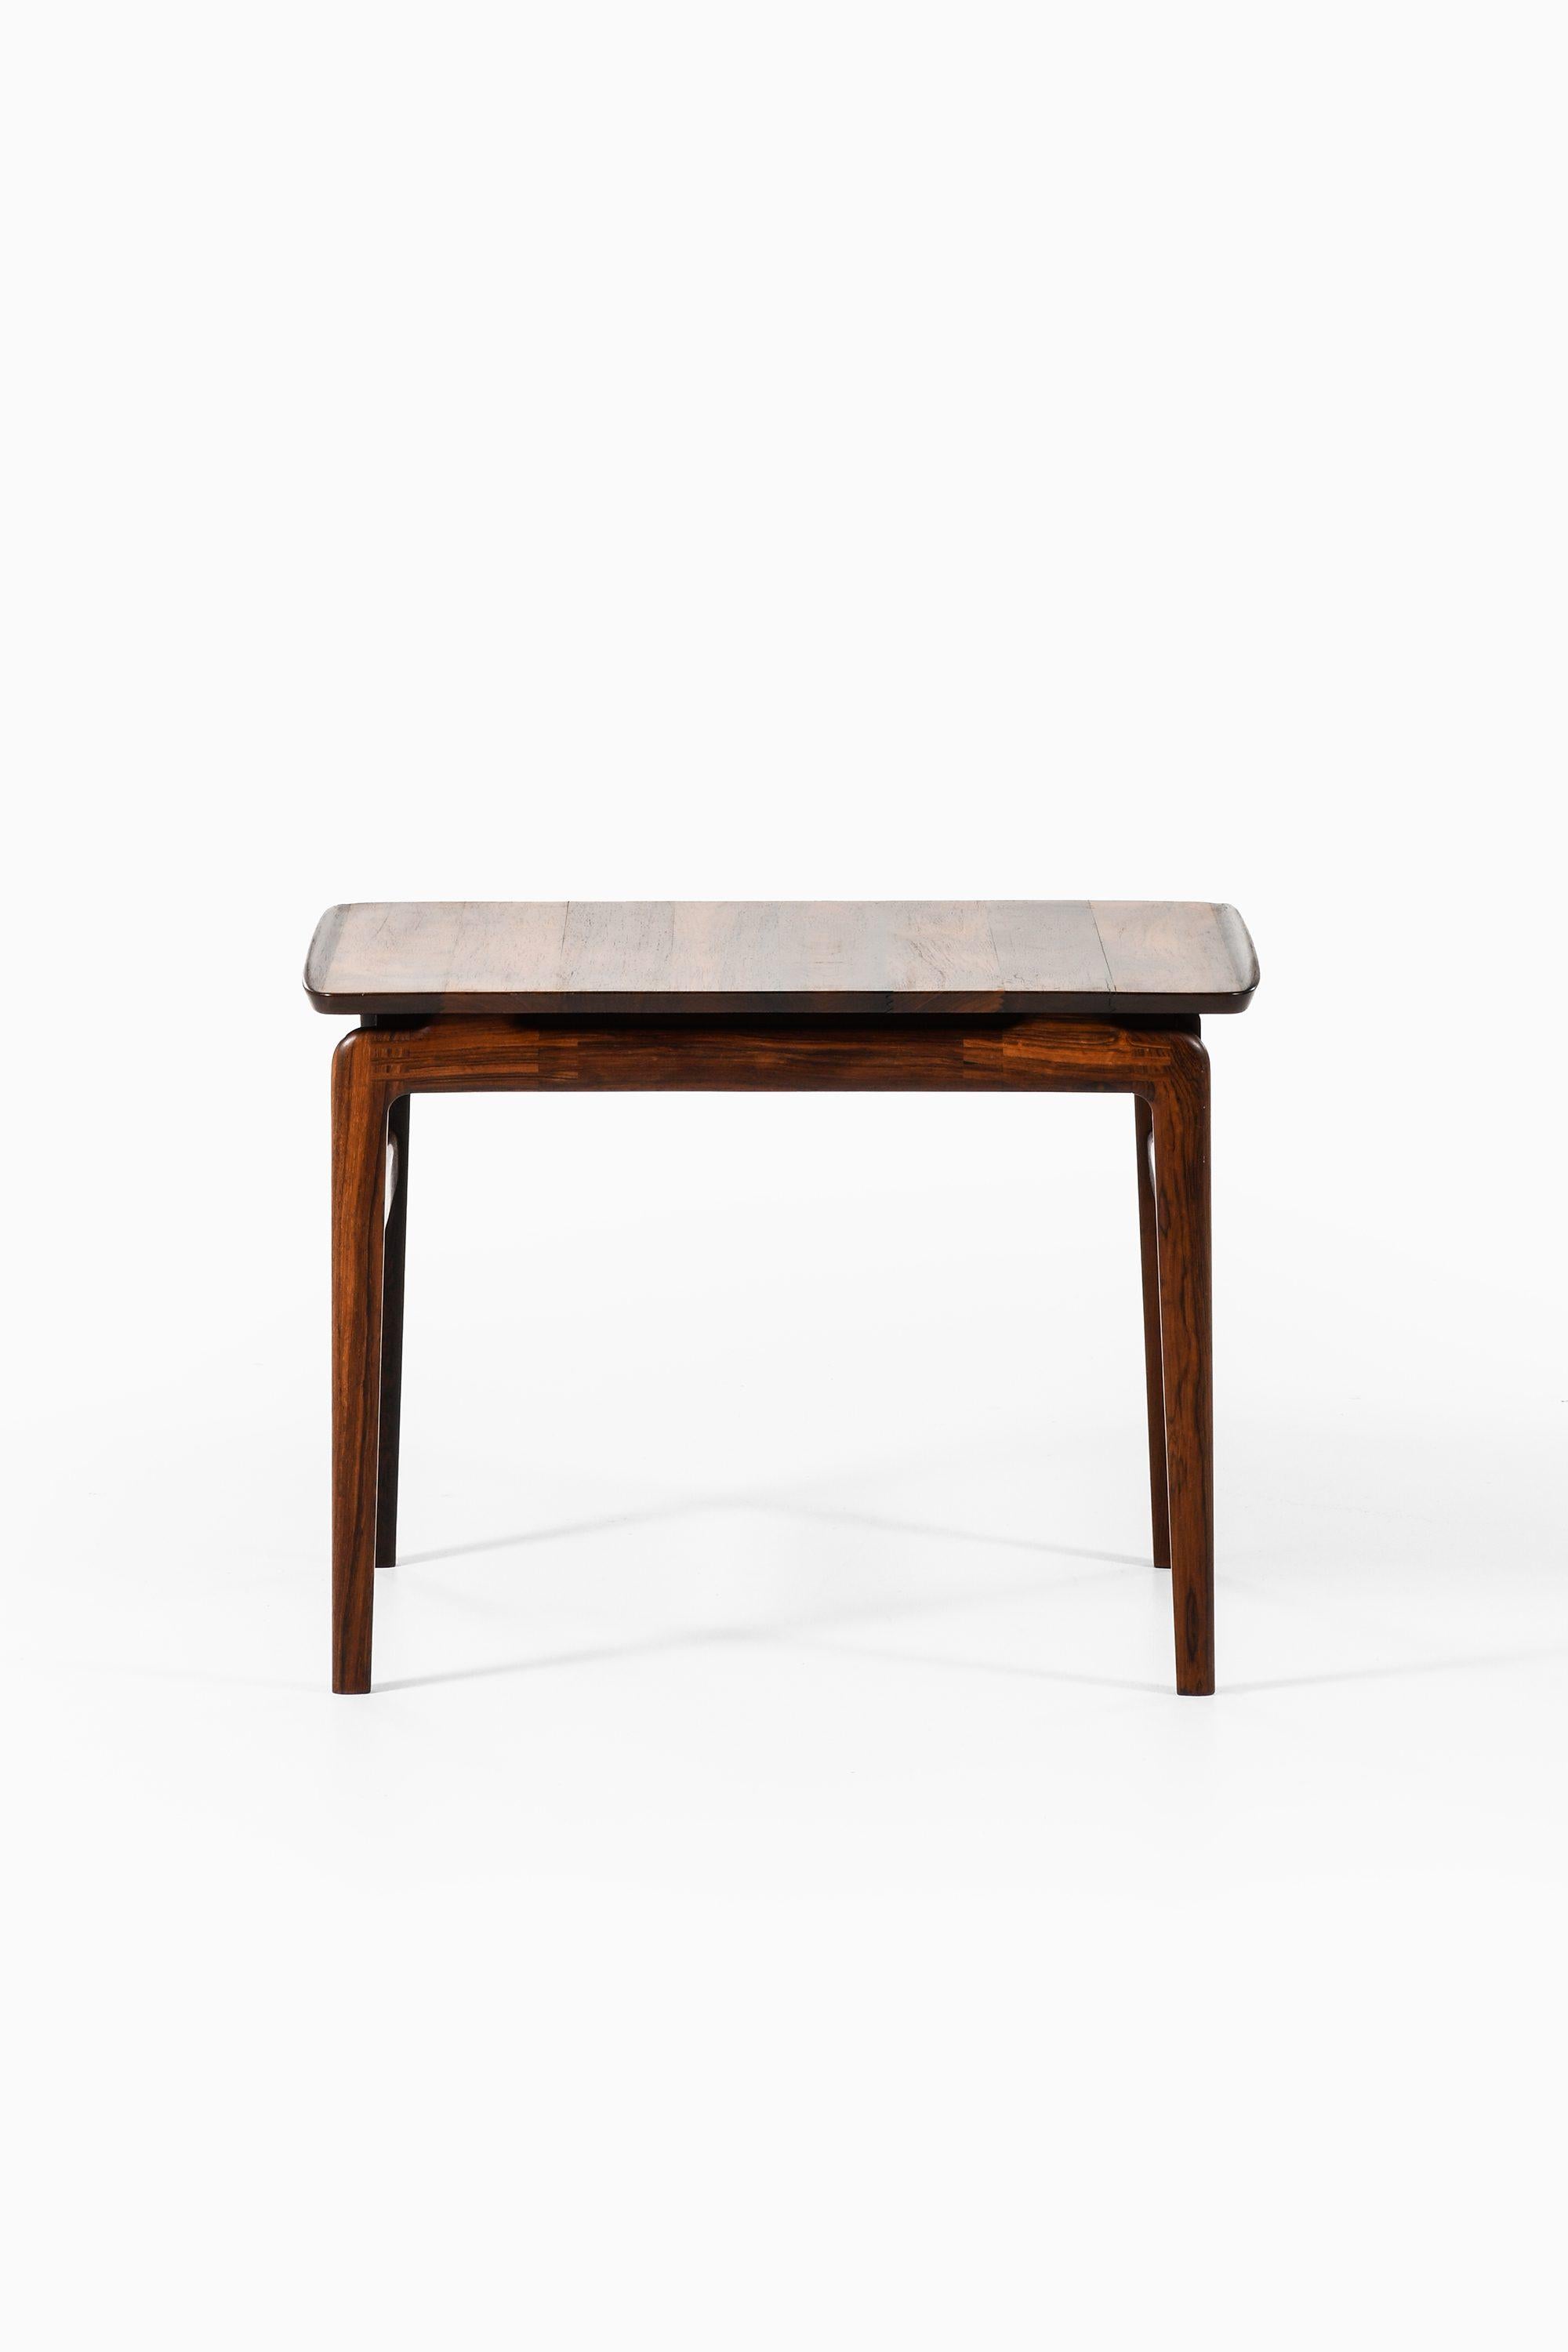 Side Table in Solid Rosewood by Peter Hvidt and Orla Mølgaard-Nielsen, 1960's

Additional Information:
Material: Solid rosewood
Style: Mid century, Scandinavia
Produced by France & Son in Denmark
Dimensions (W x D x H): 75 x 50 x 54